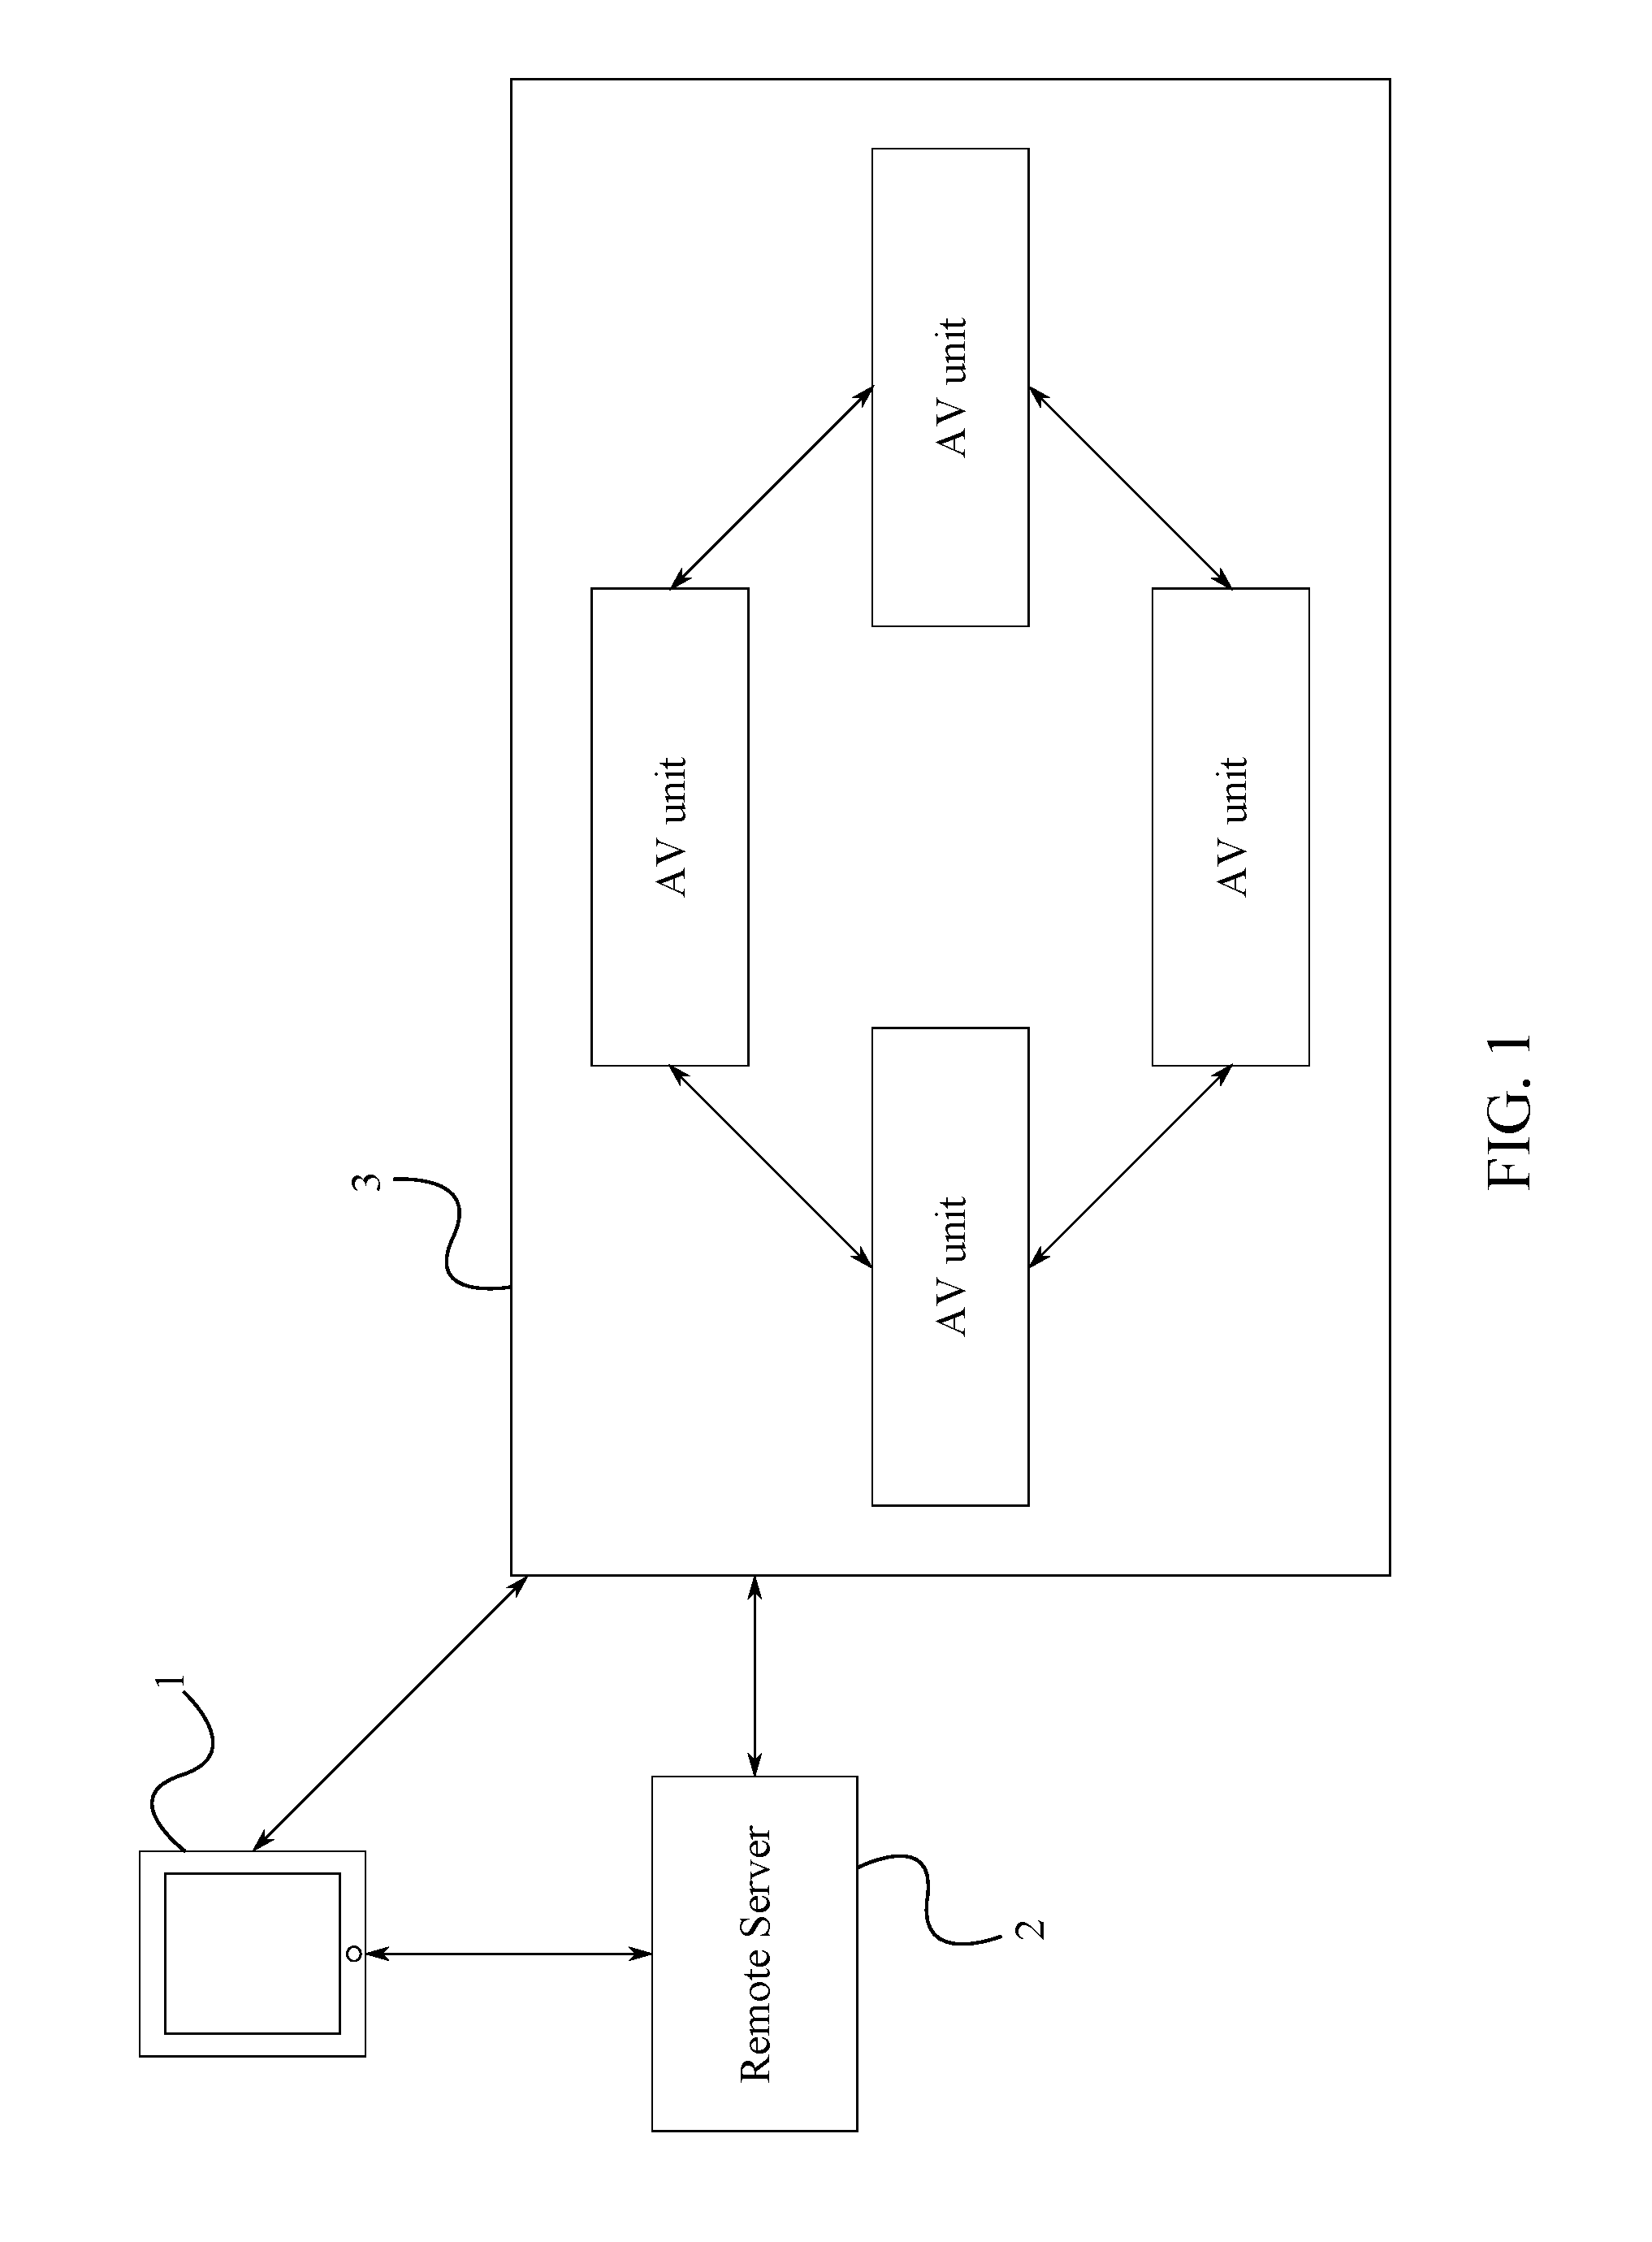 Method for Distance Based Content Mirroring and Mirroring Transfer